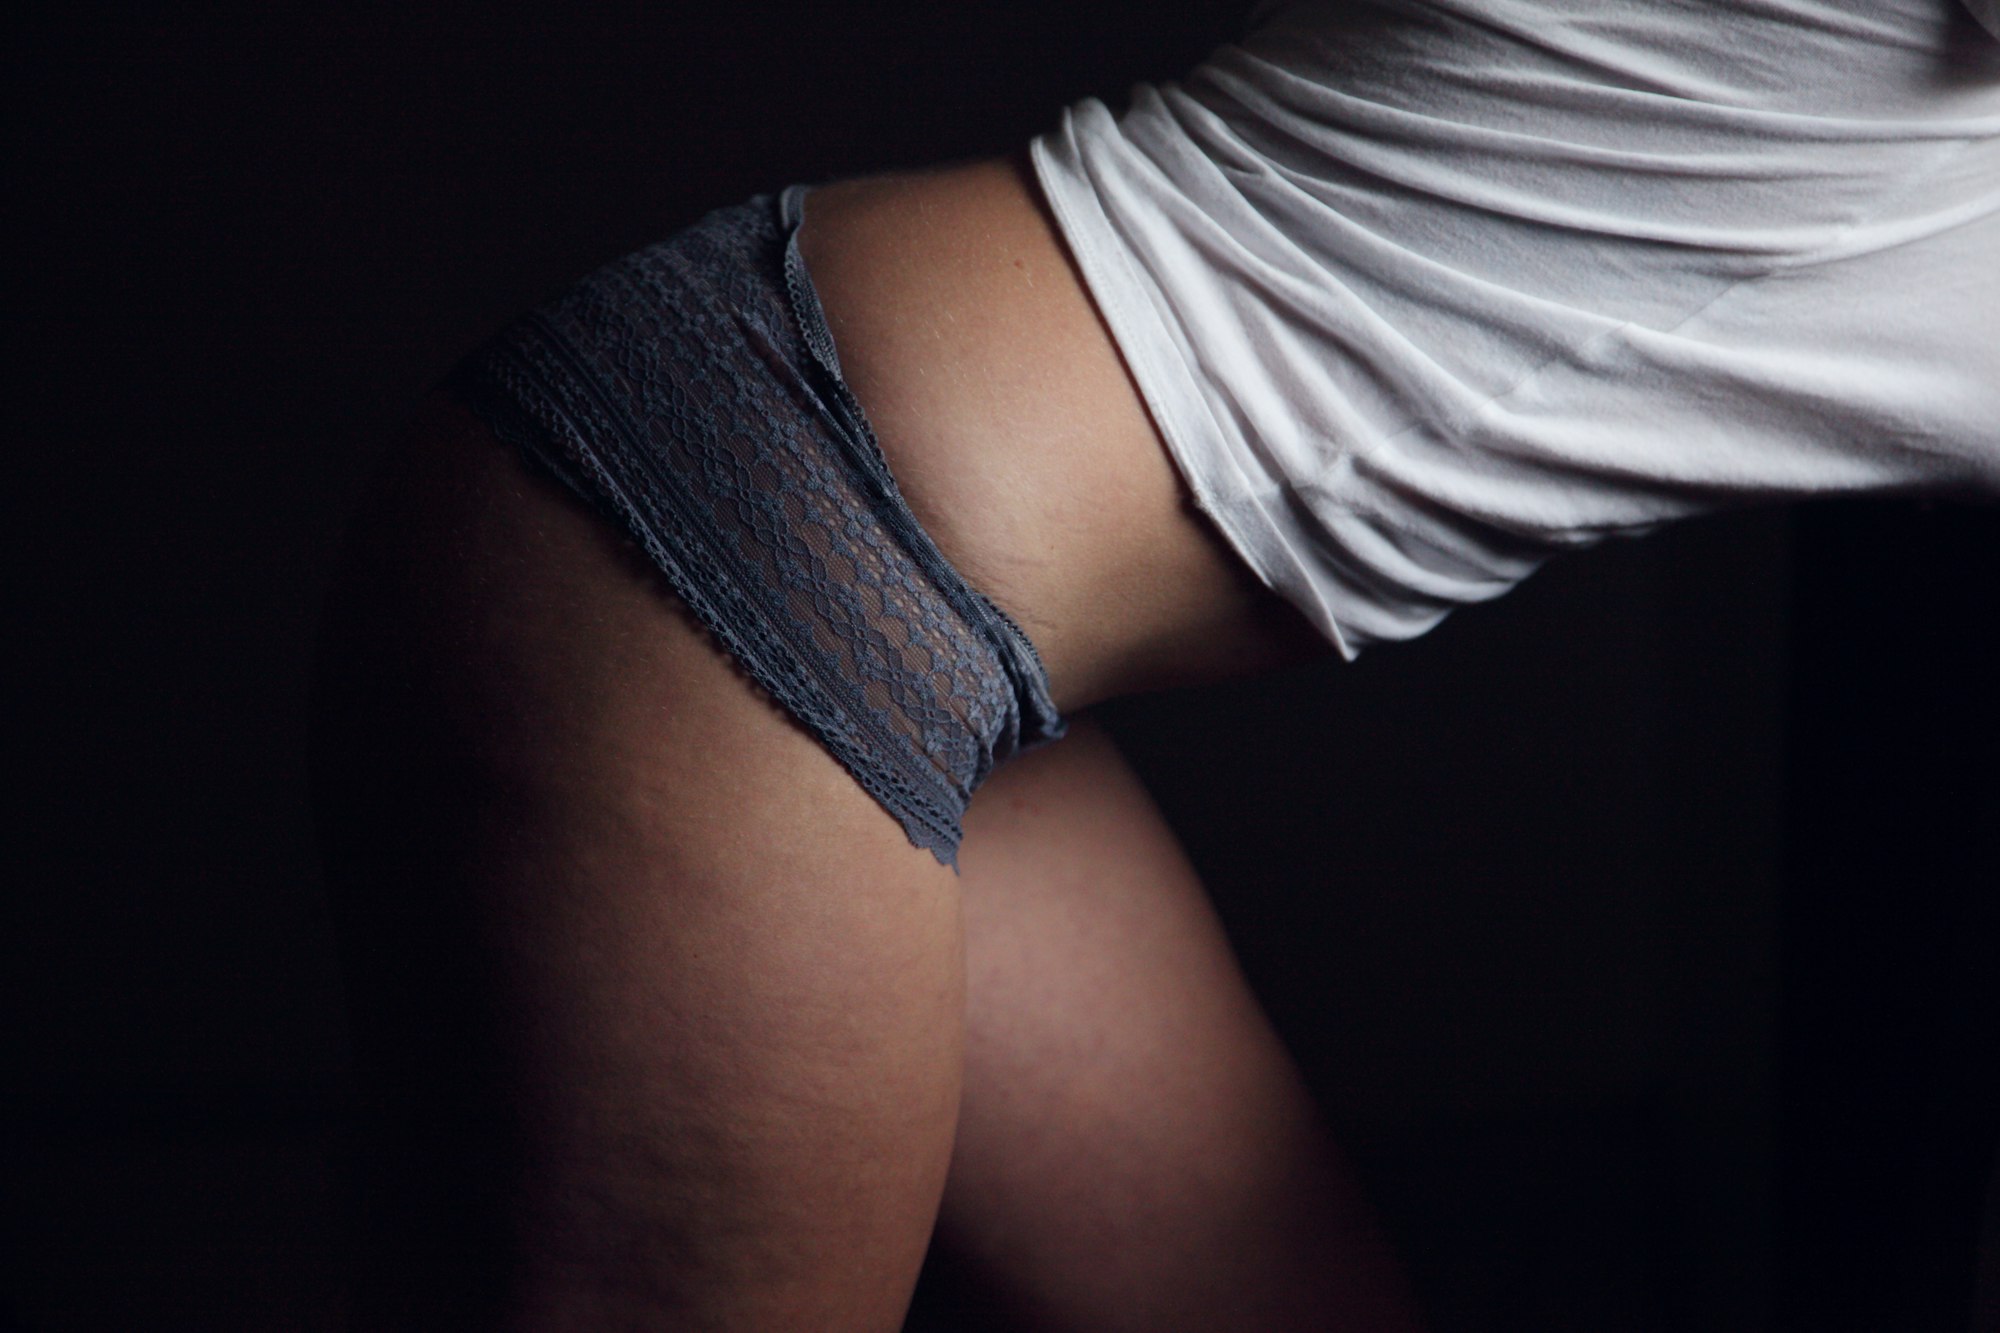 Natural portrait of hips and thighs of a twenty-five year old woman showing cellulite and stretch marks.